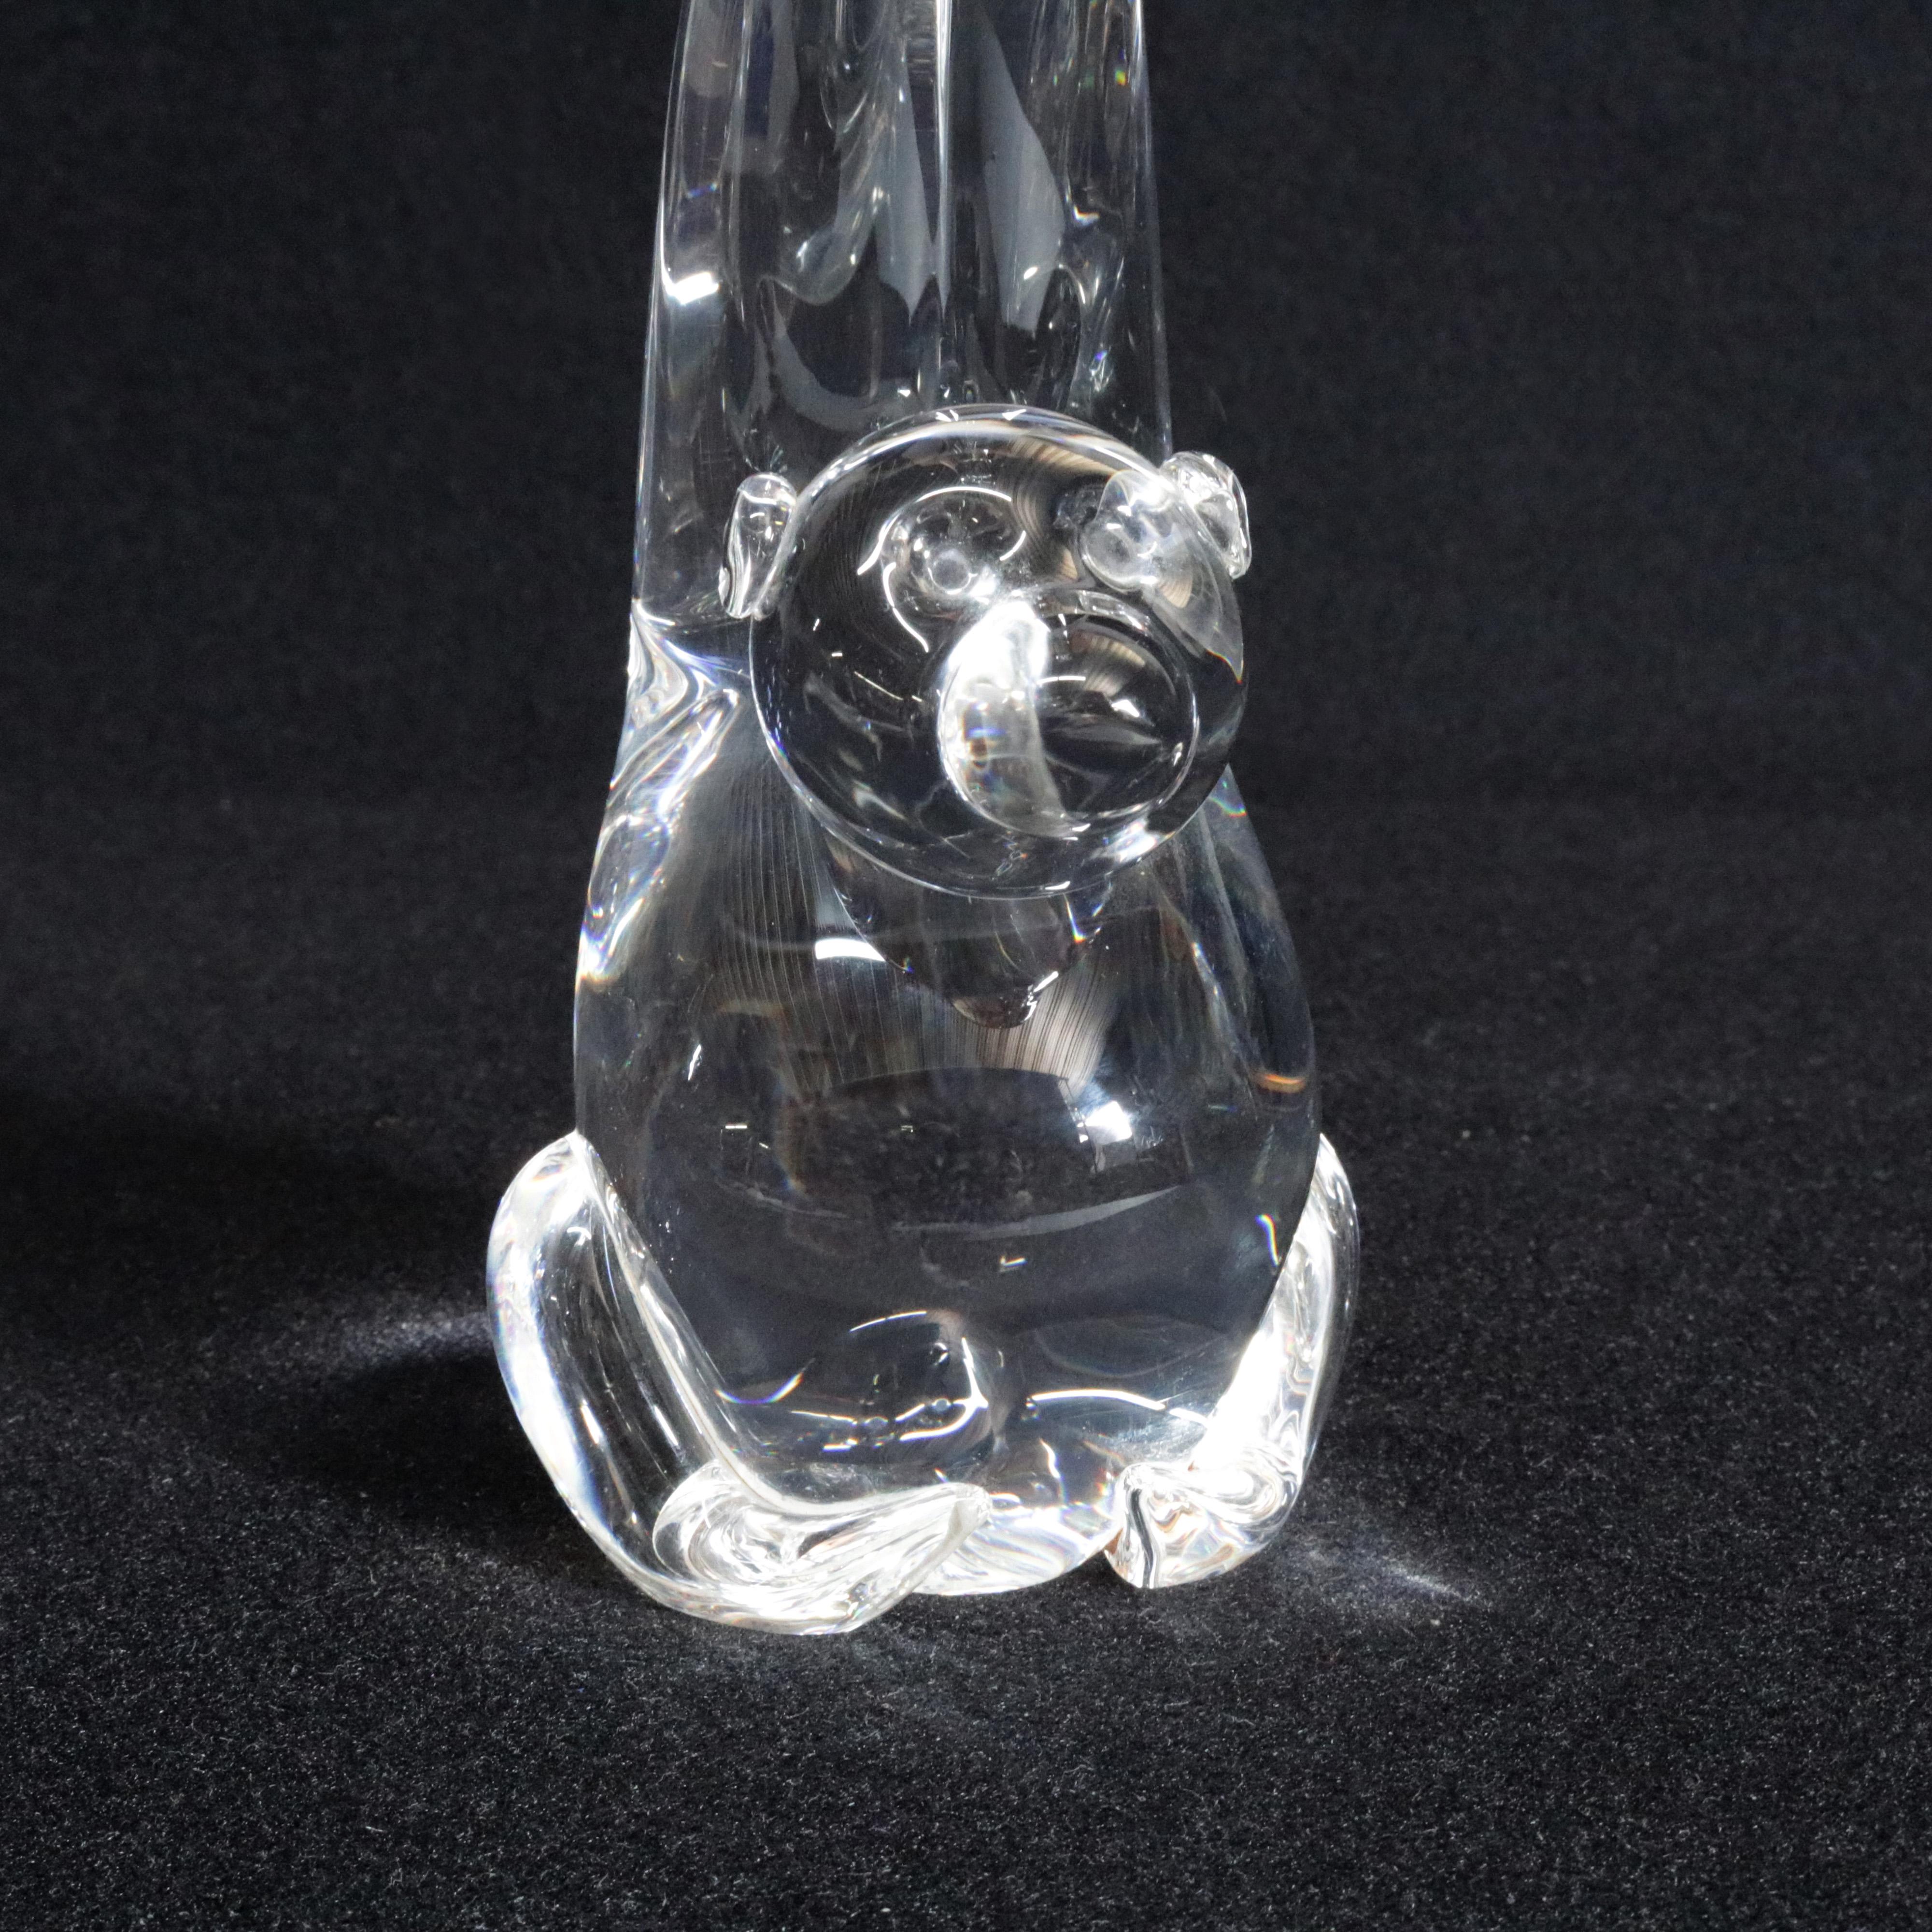 American Steuben Figurative Crystal Sculpture Monkey Paperweight by de Sousa, Signed